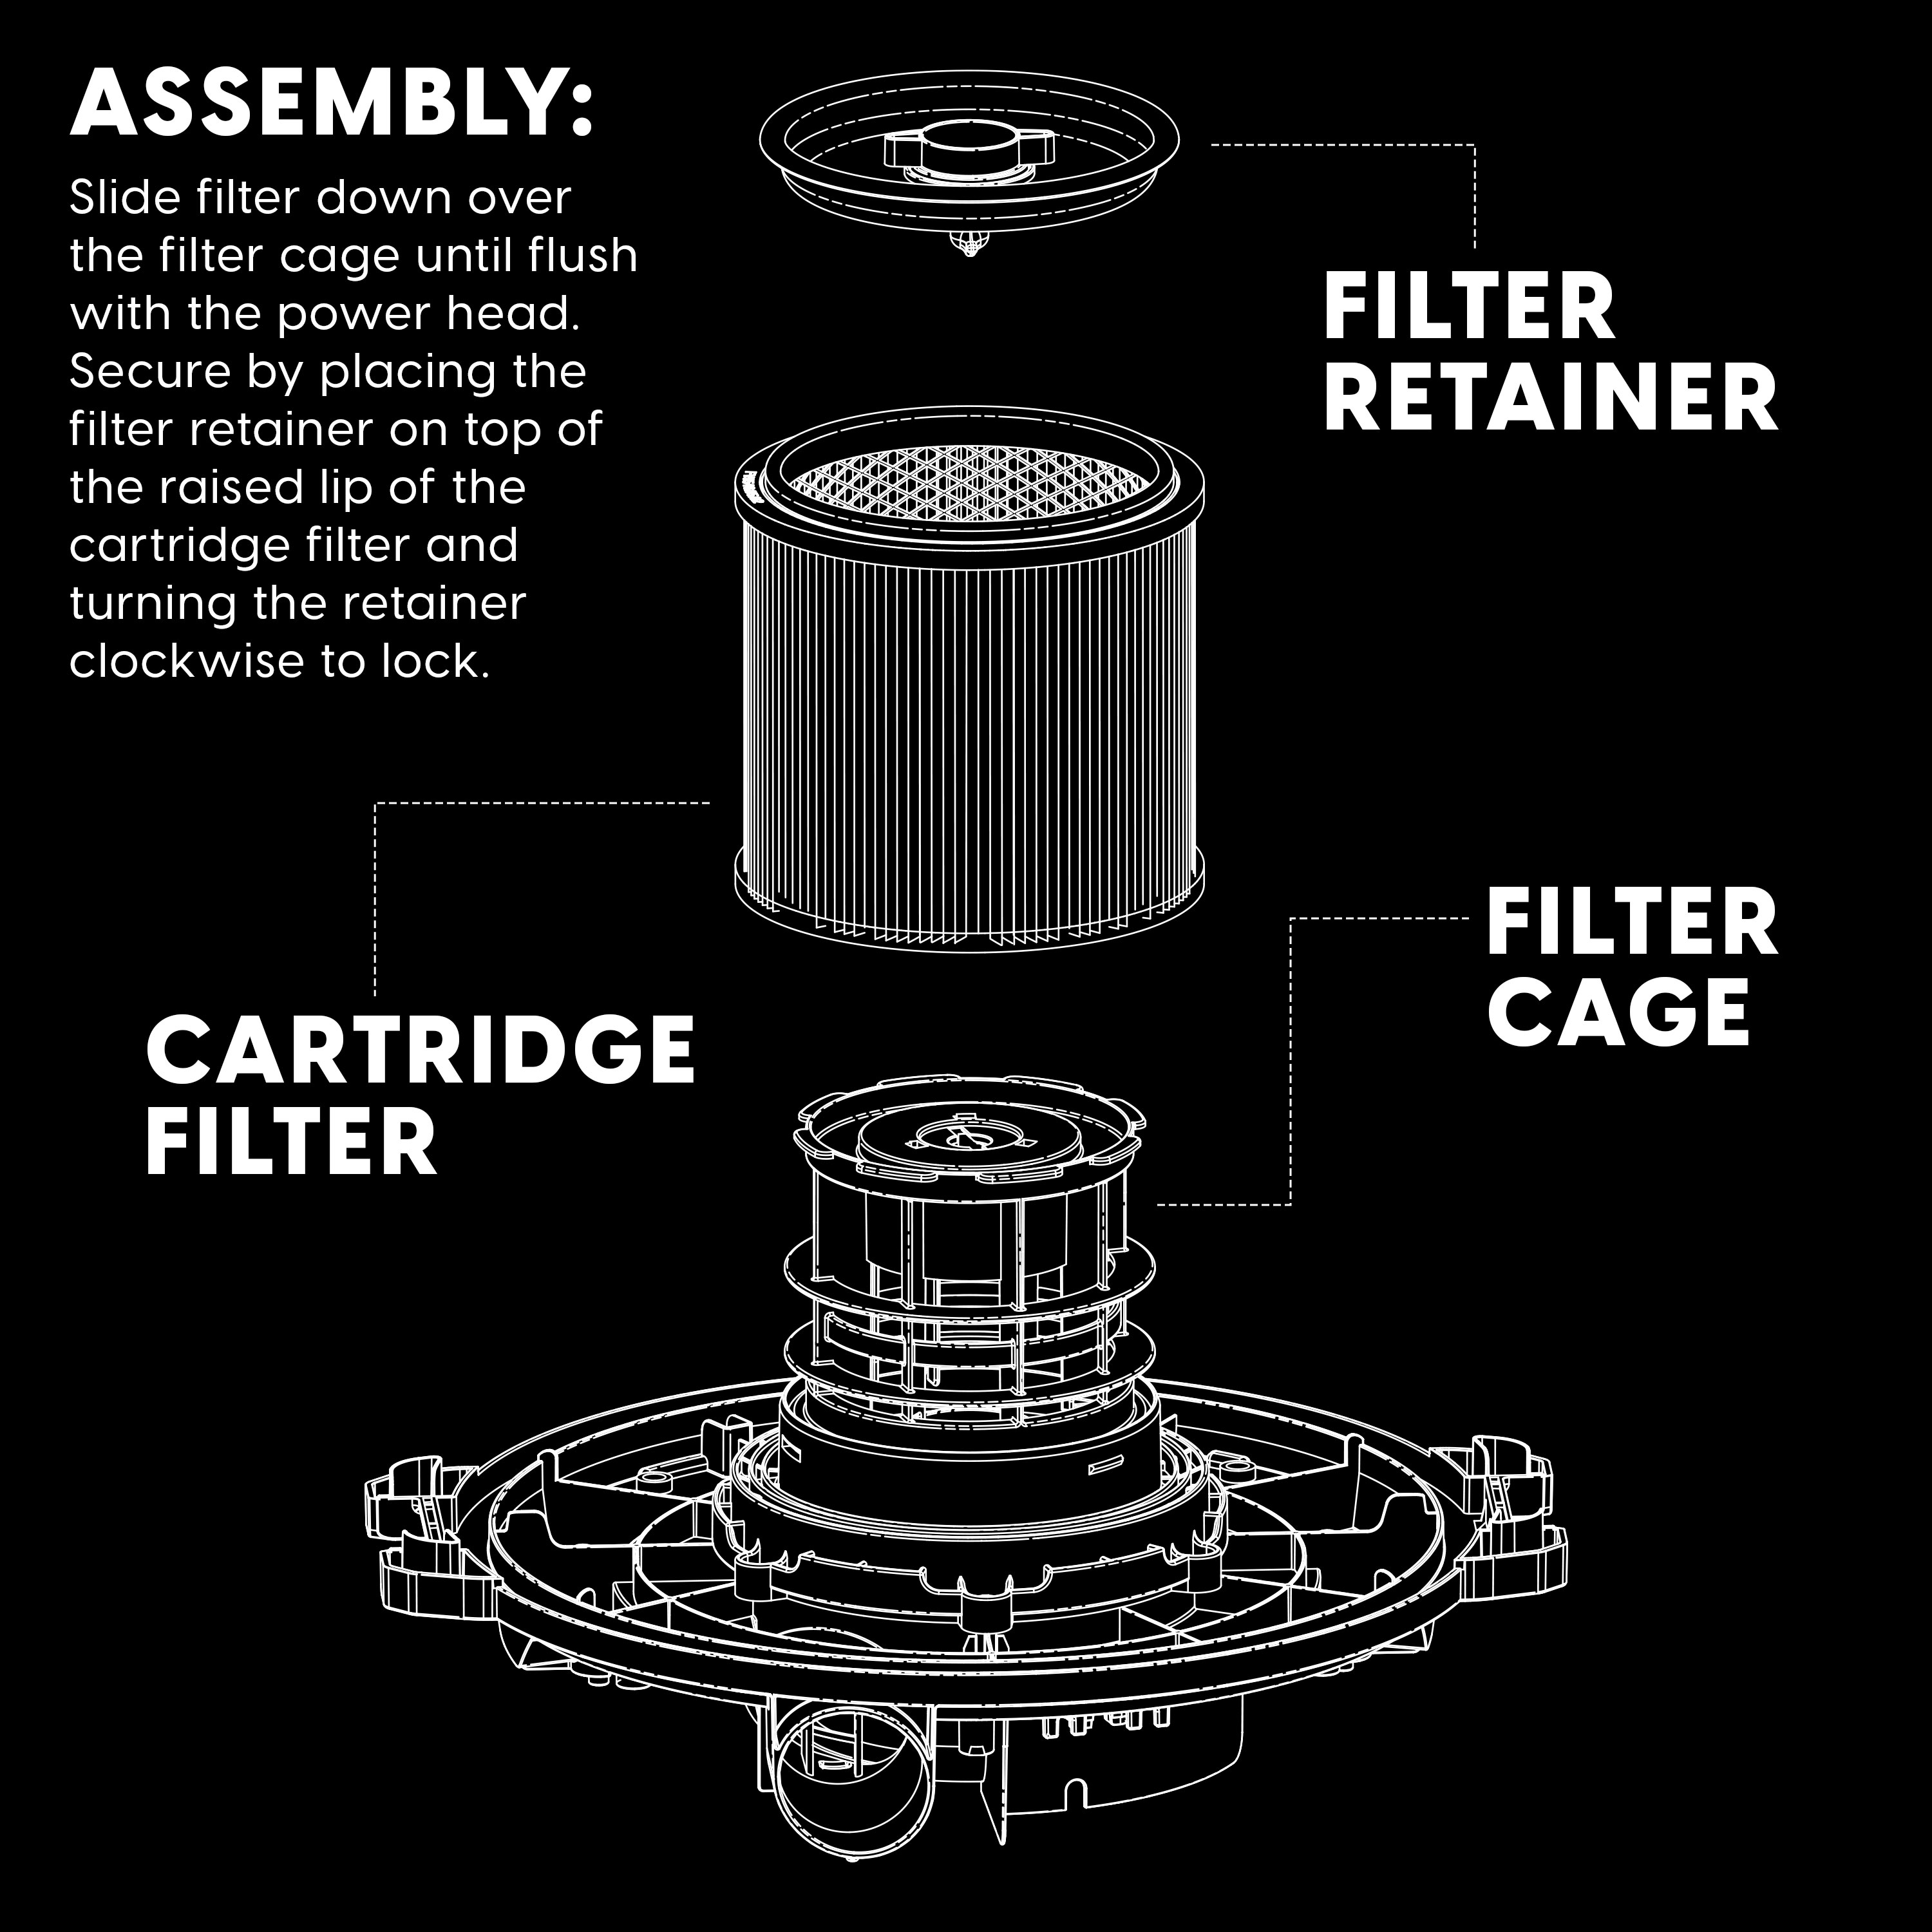 Vacmaster HEPA Material Fine Dust Cartridge Filter and Retainer (works with  Shop-Vac)